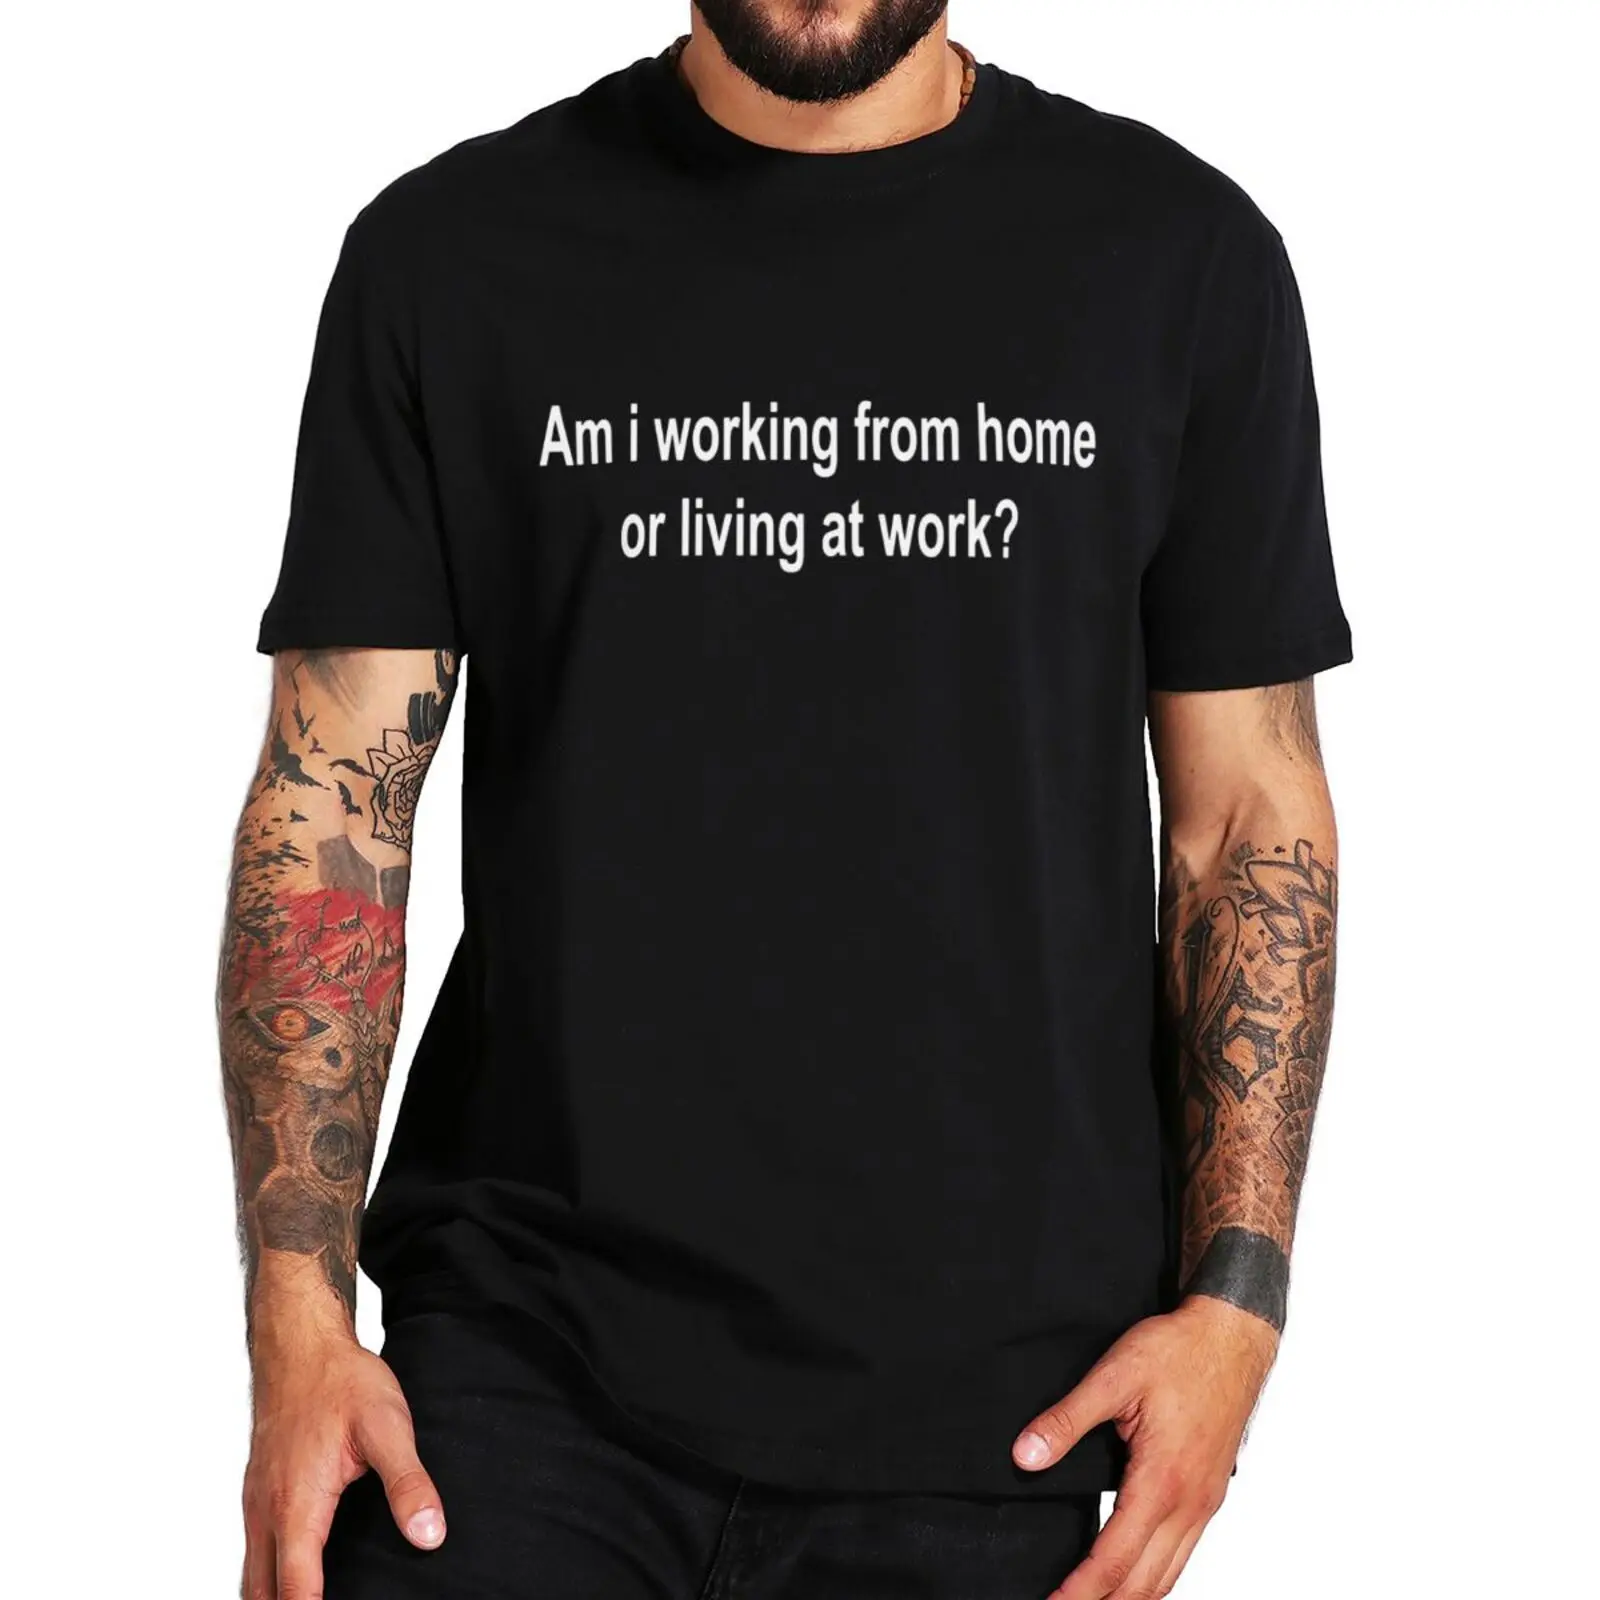 

Am I Working From Home Or Living At Work T Shirt Funny Sayings Humor Tee Tops 100% Cotton Unisex Casual T-shirts EU Size